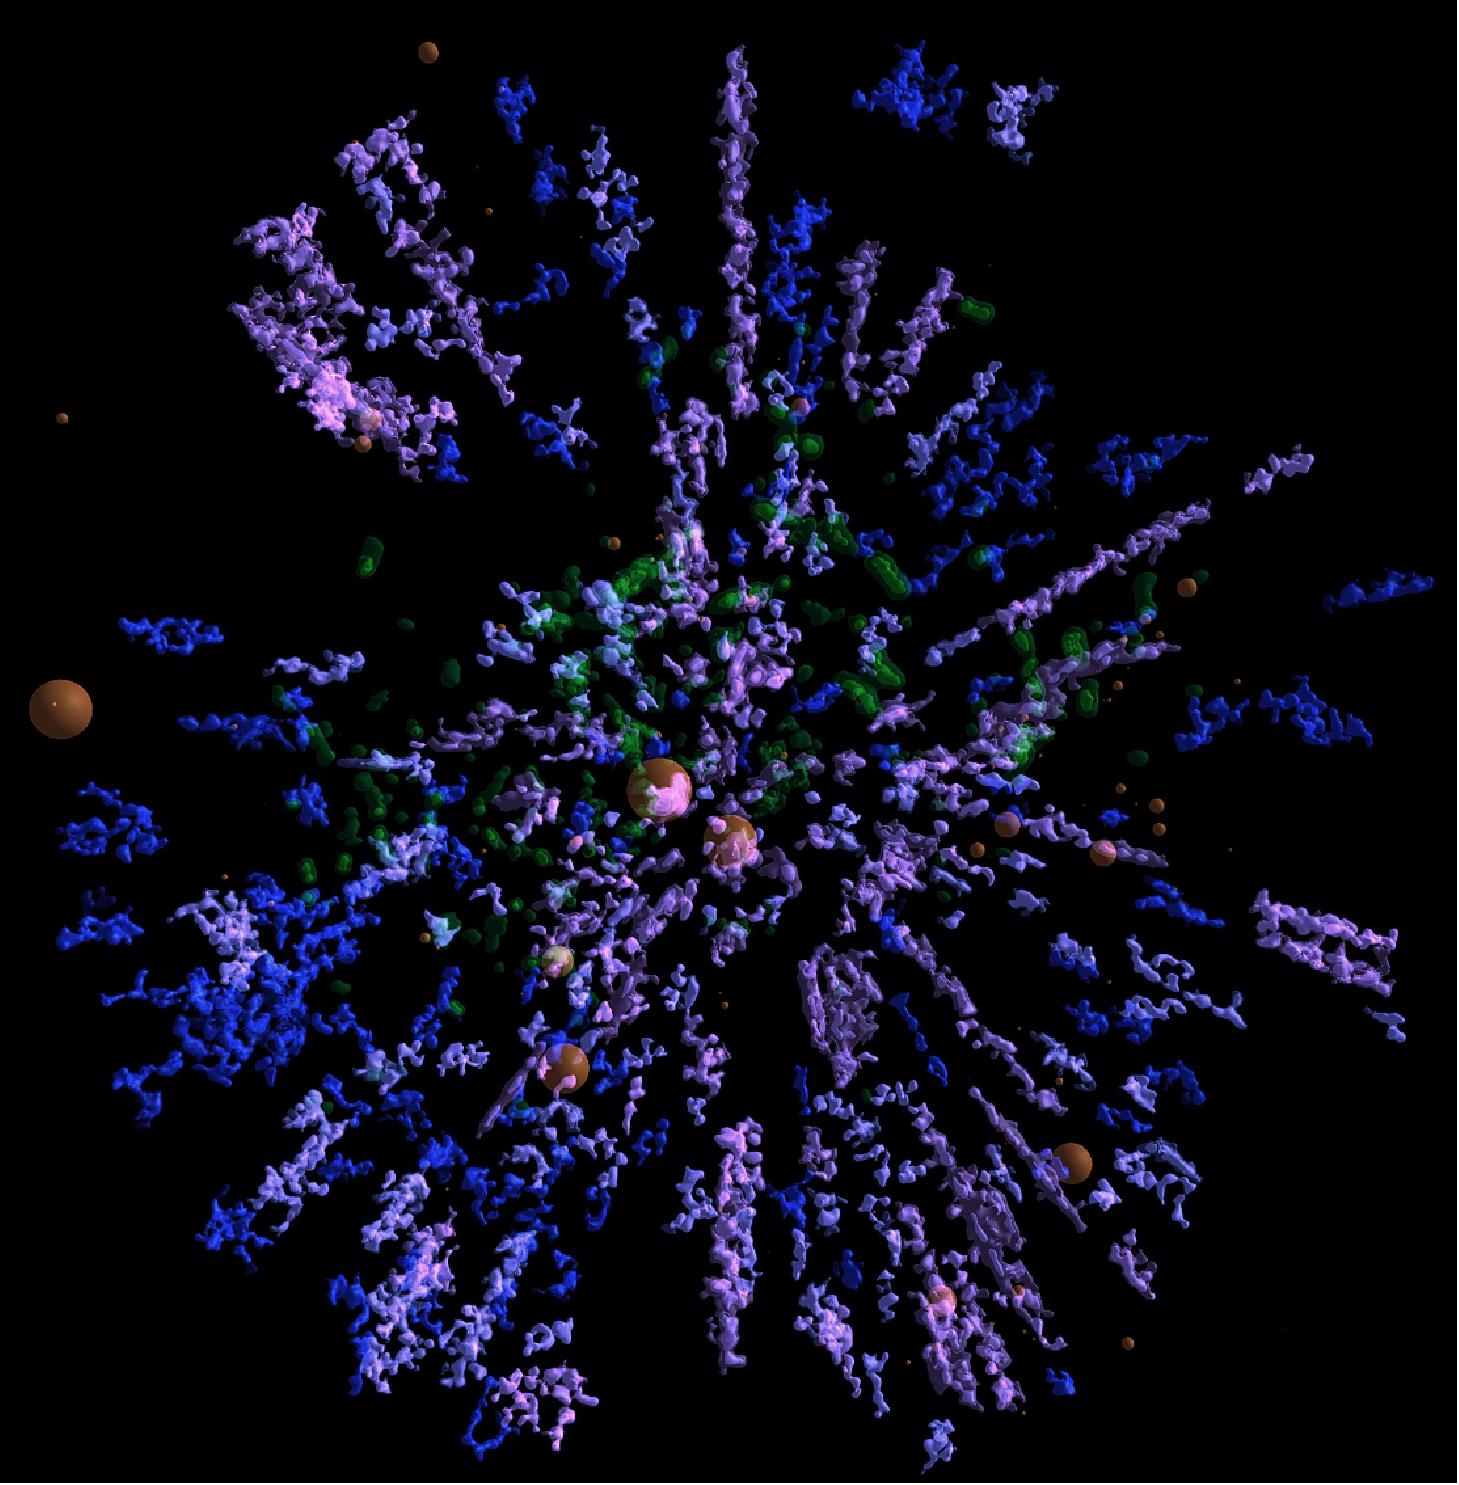 Figure 43: Star density map, showing the 3D distribution of the most massive stars in our Galactic neighborhood, based on the latest data from ESA's Gaia mission (image credit: Galaxy Map / K. Jardine)